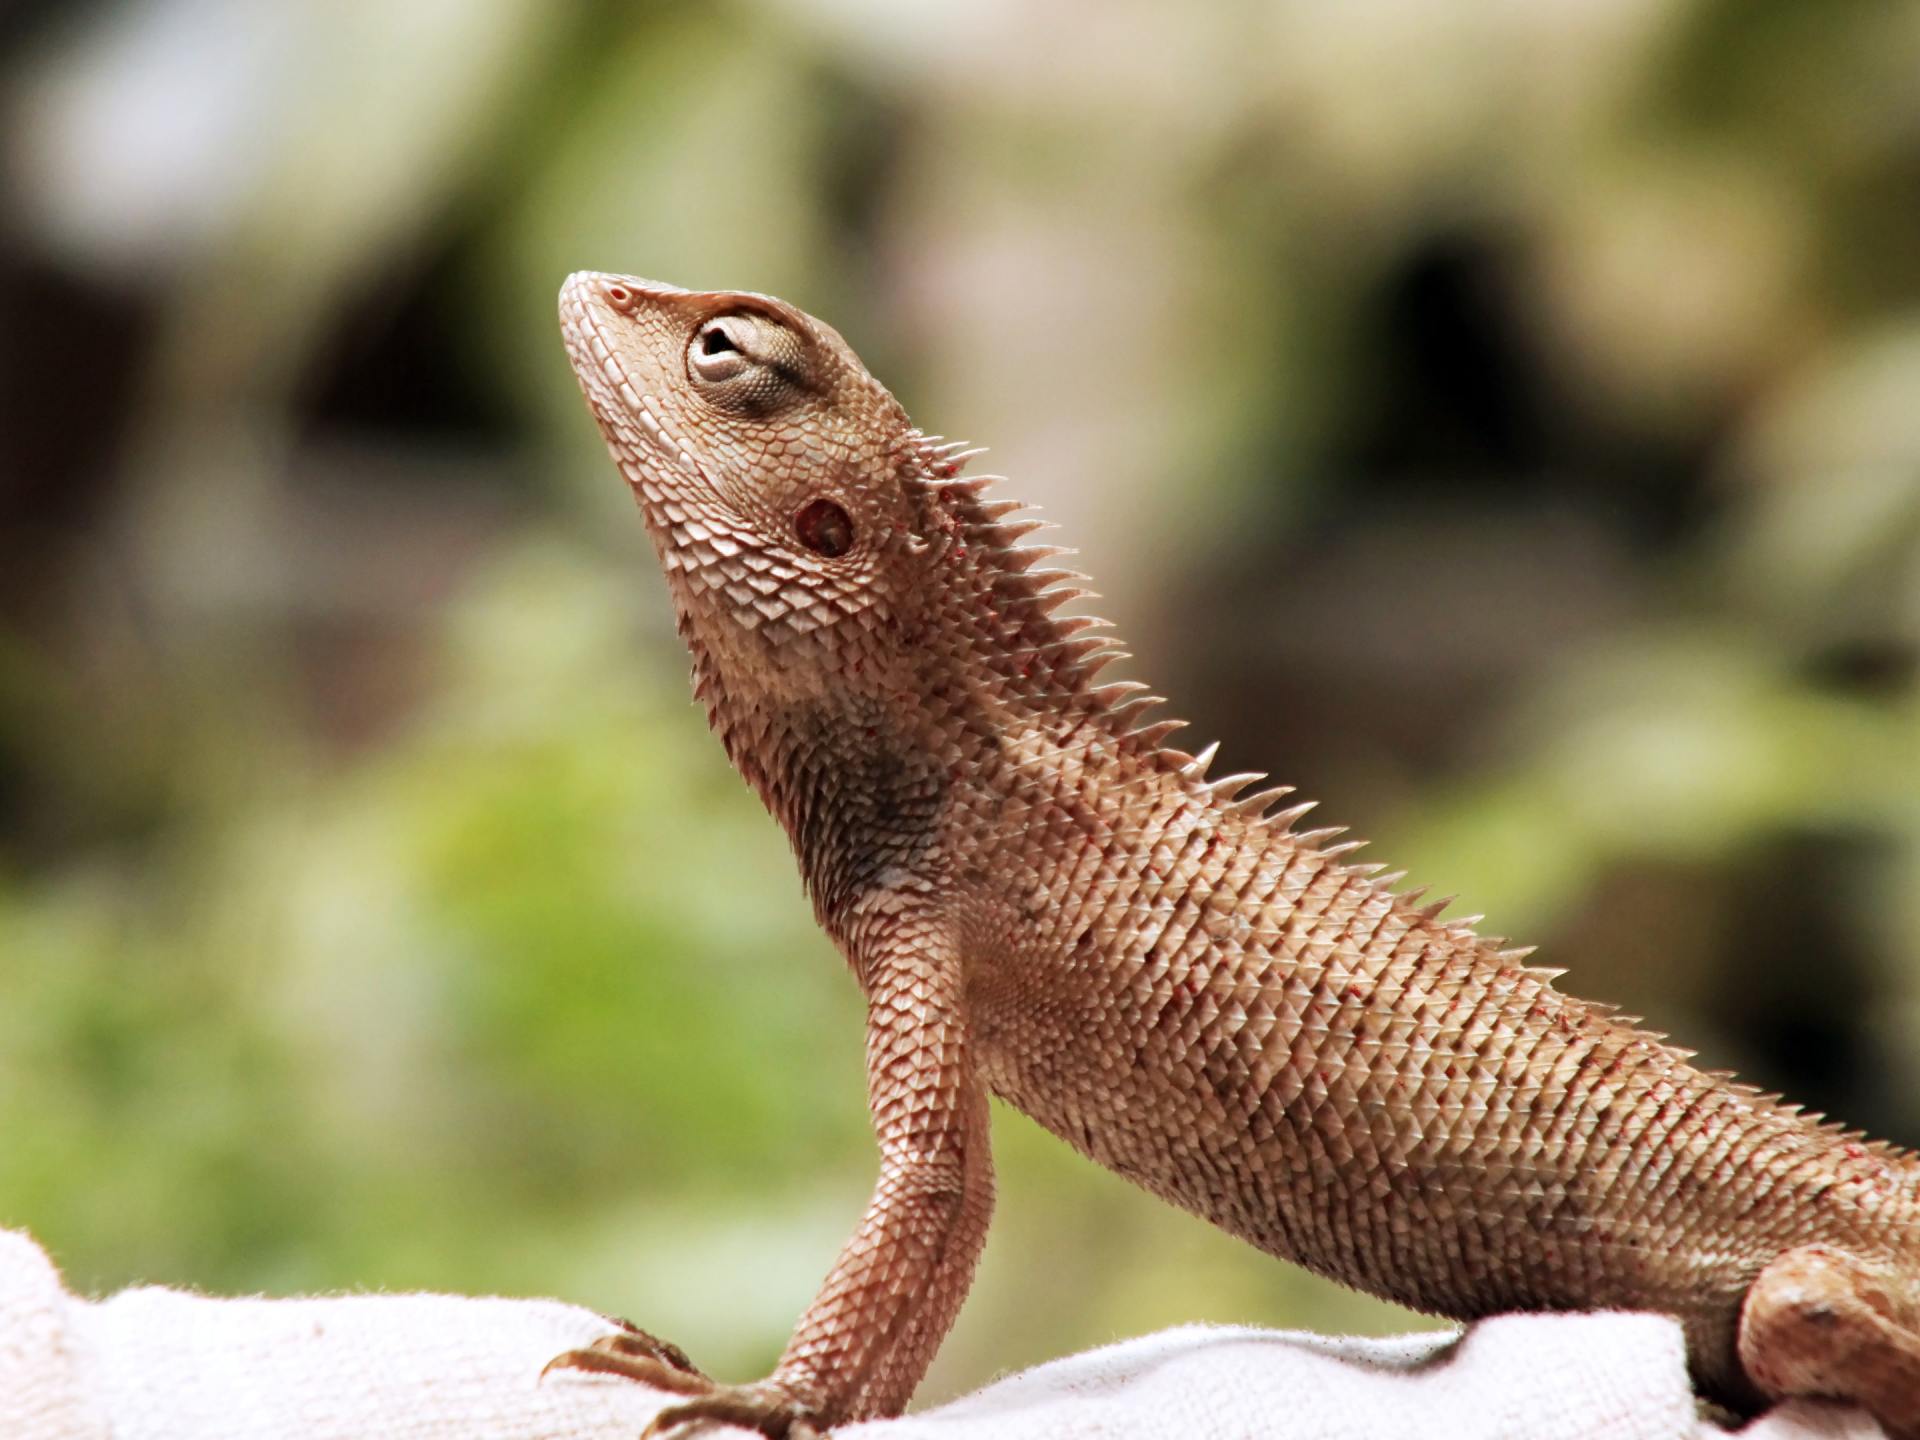 a lizard is sitting on a white cloth and looking up